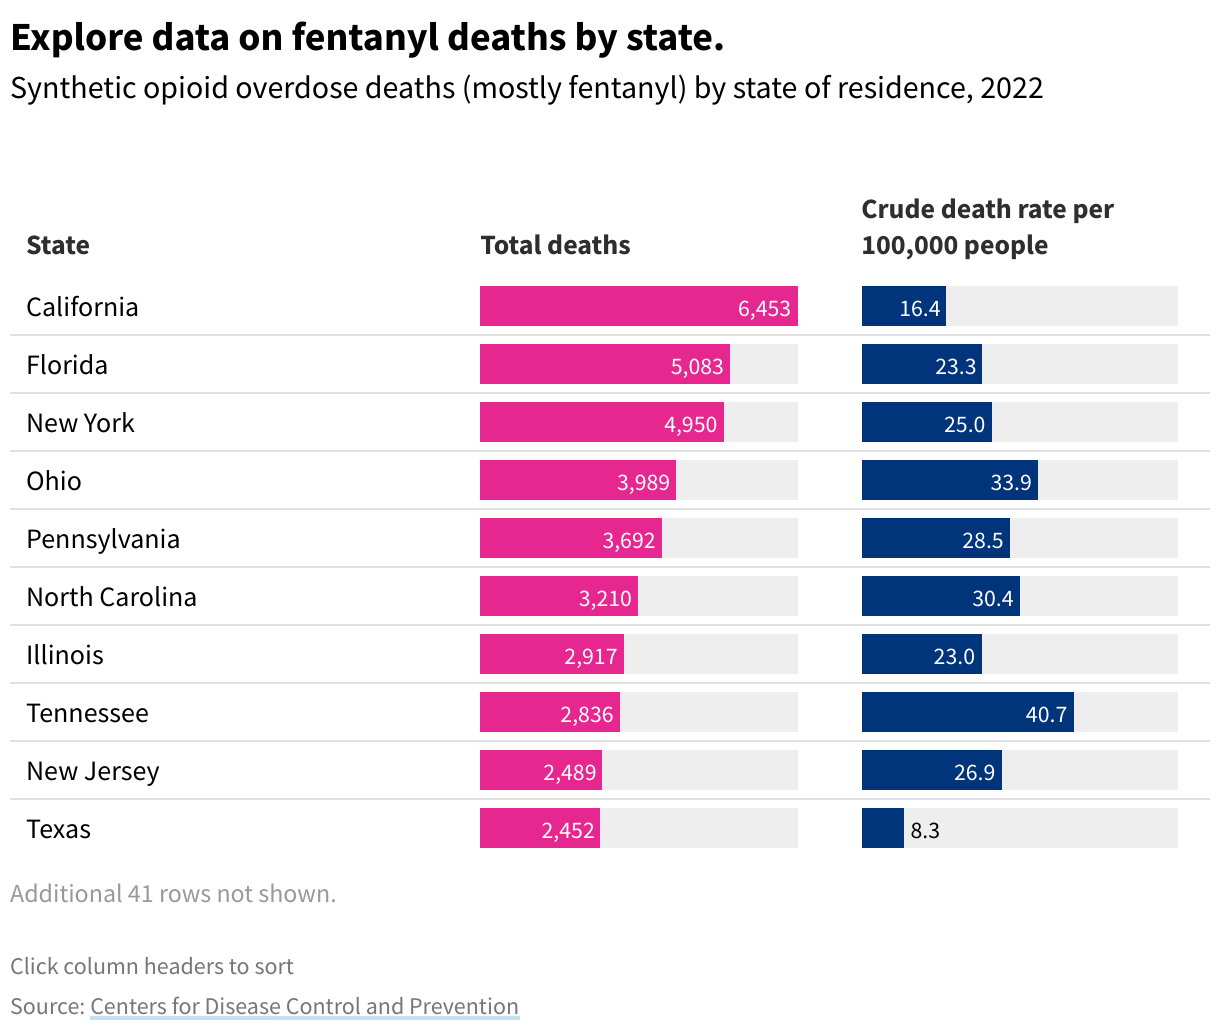 Table showing total fentanyl deaths and deaths per 100k people by state in 2022. 